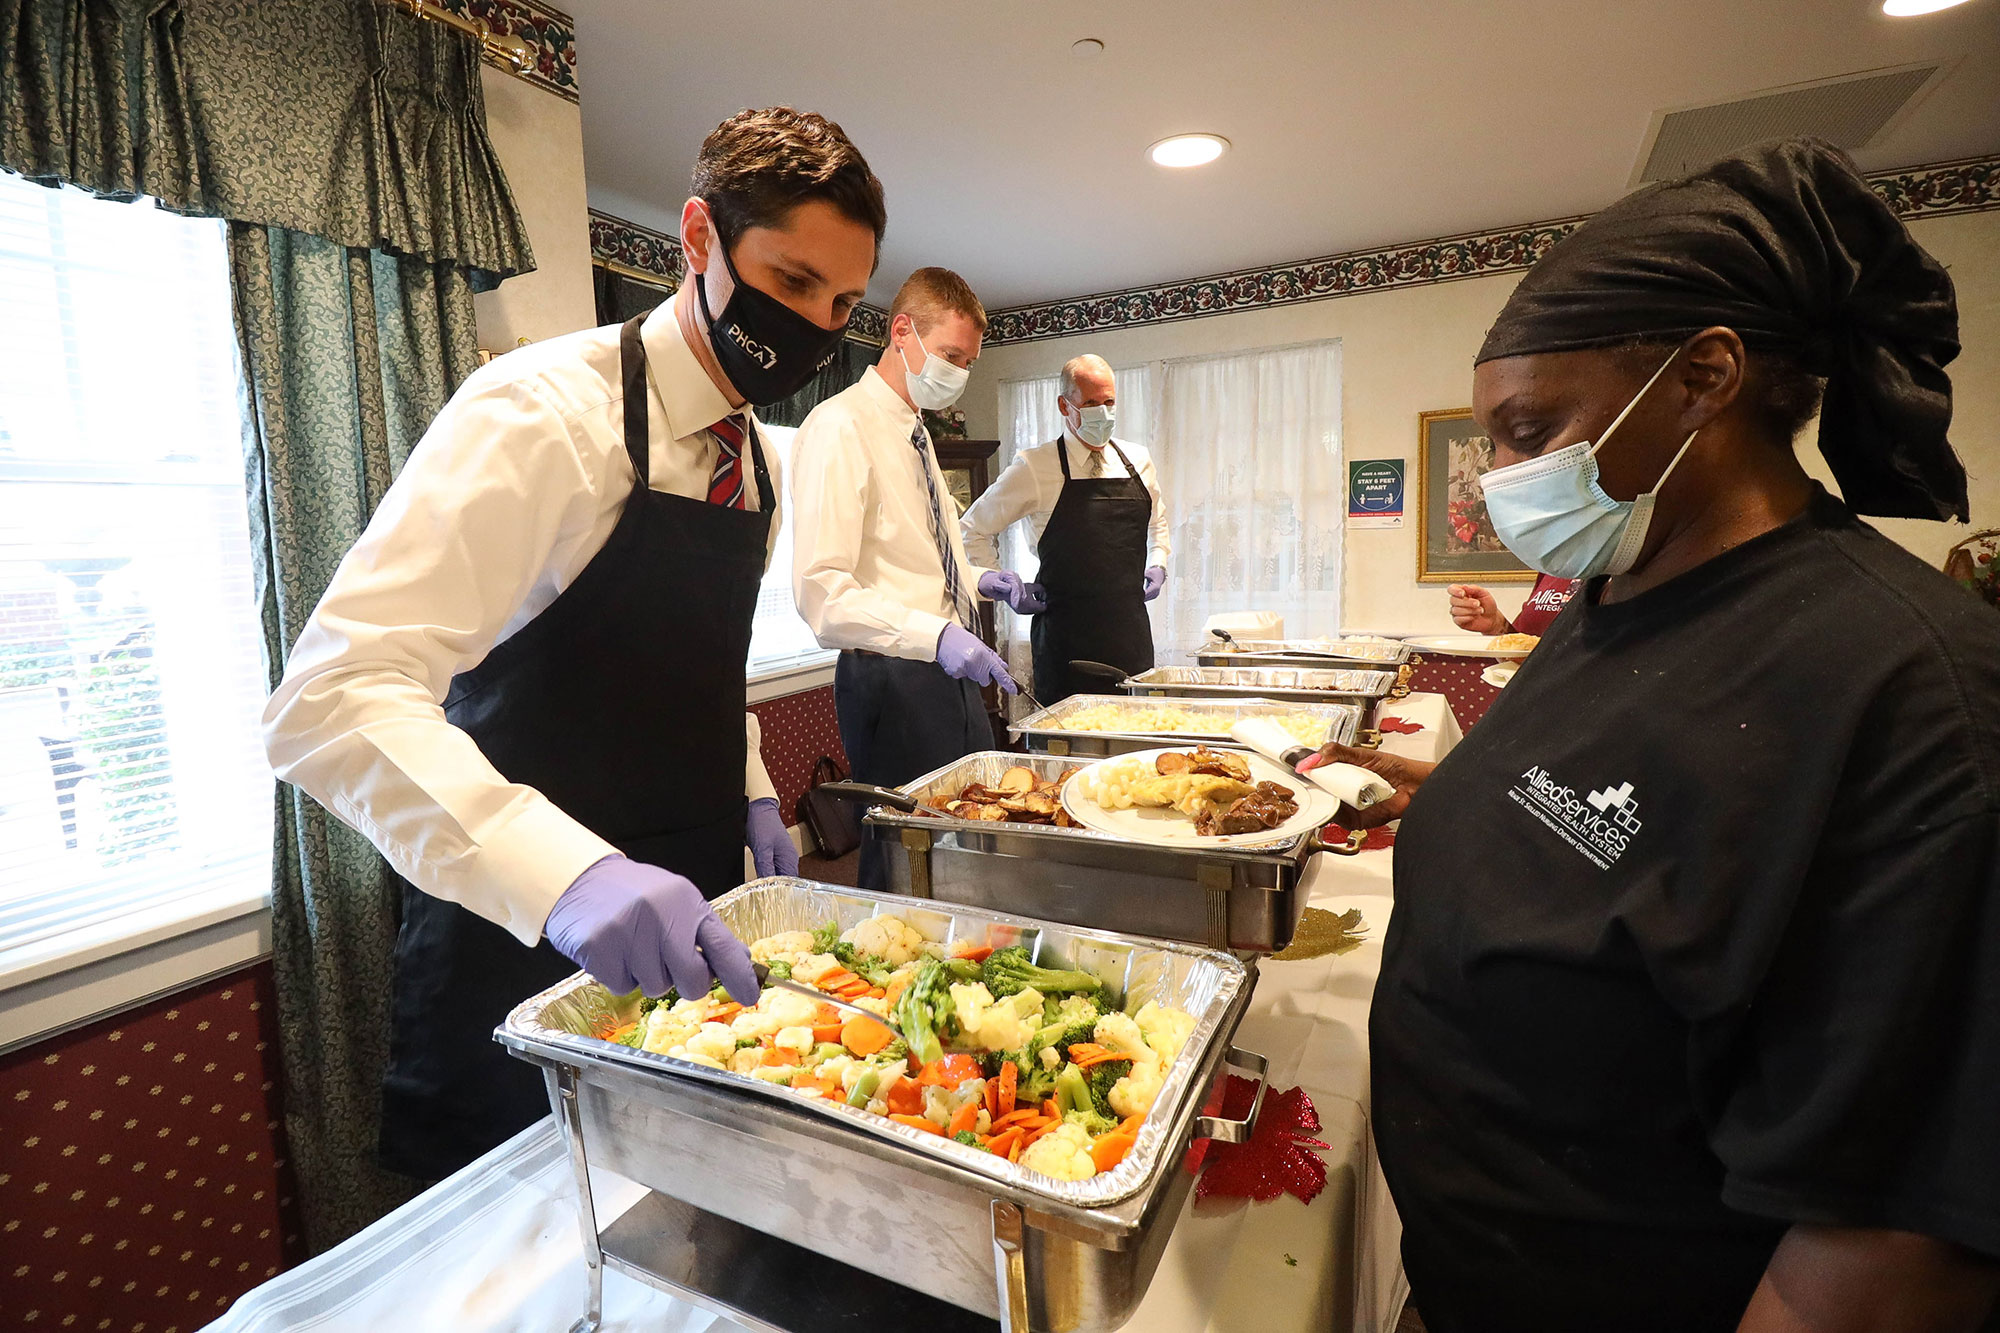 Shamberg and others from PHCA volunteer serving meals to health care workers.